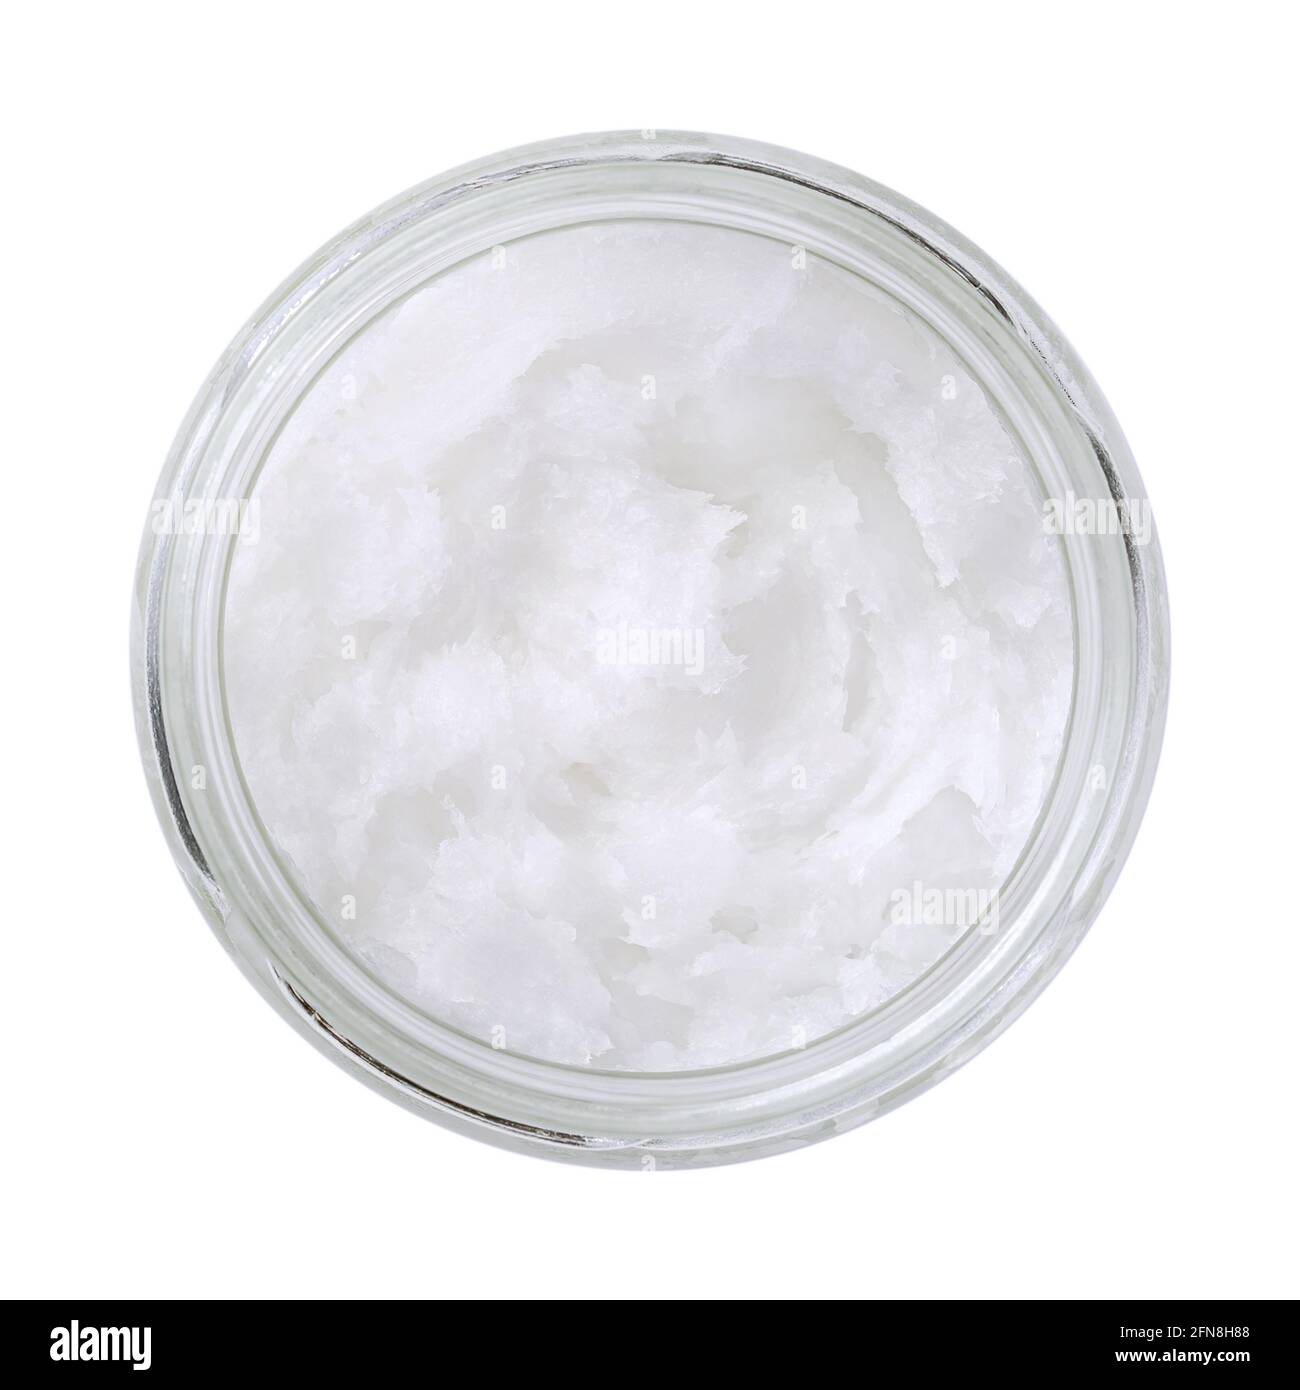 Coconut oil in a glass jar. Unrefined coconut butter, an edible oil, derived from the wick, meat, and milk of the coconut palm fruit. White solid fat. Stock Photo